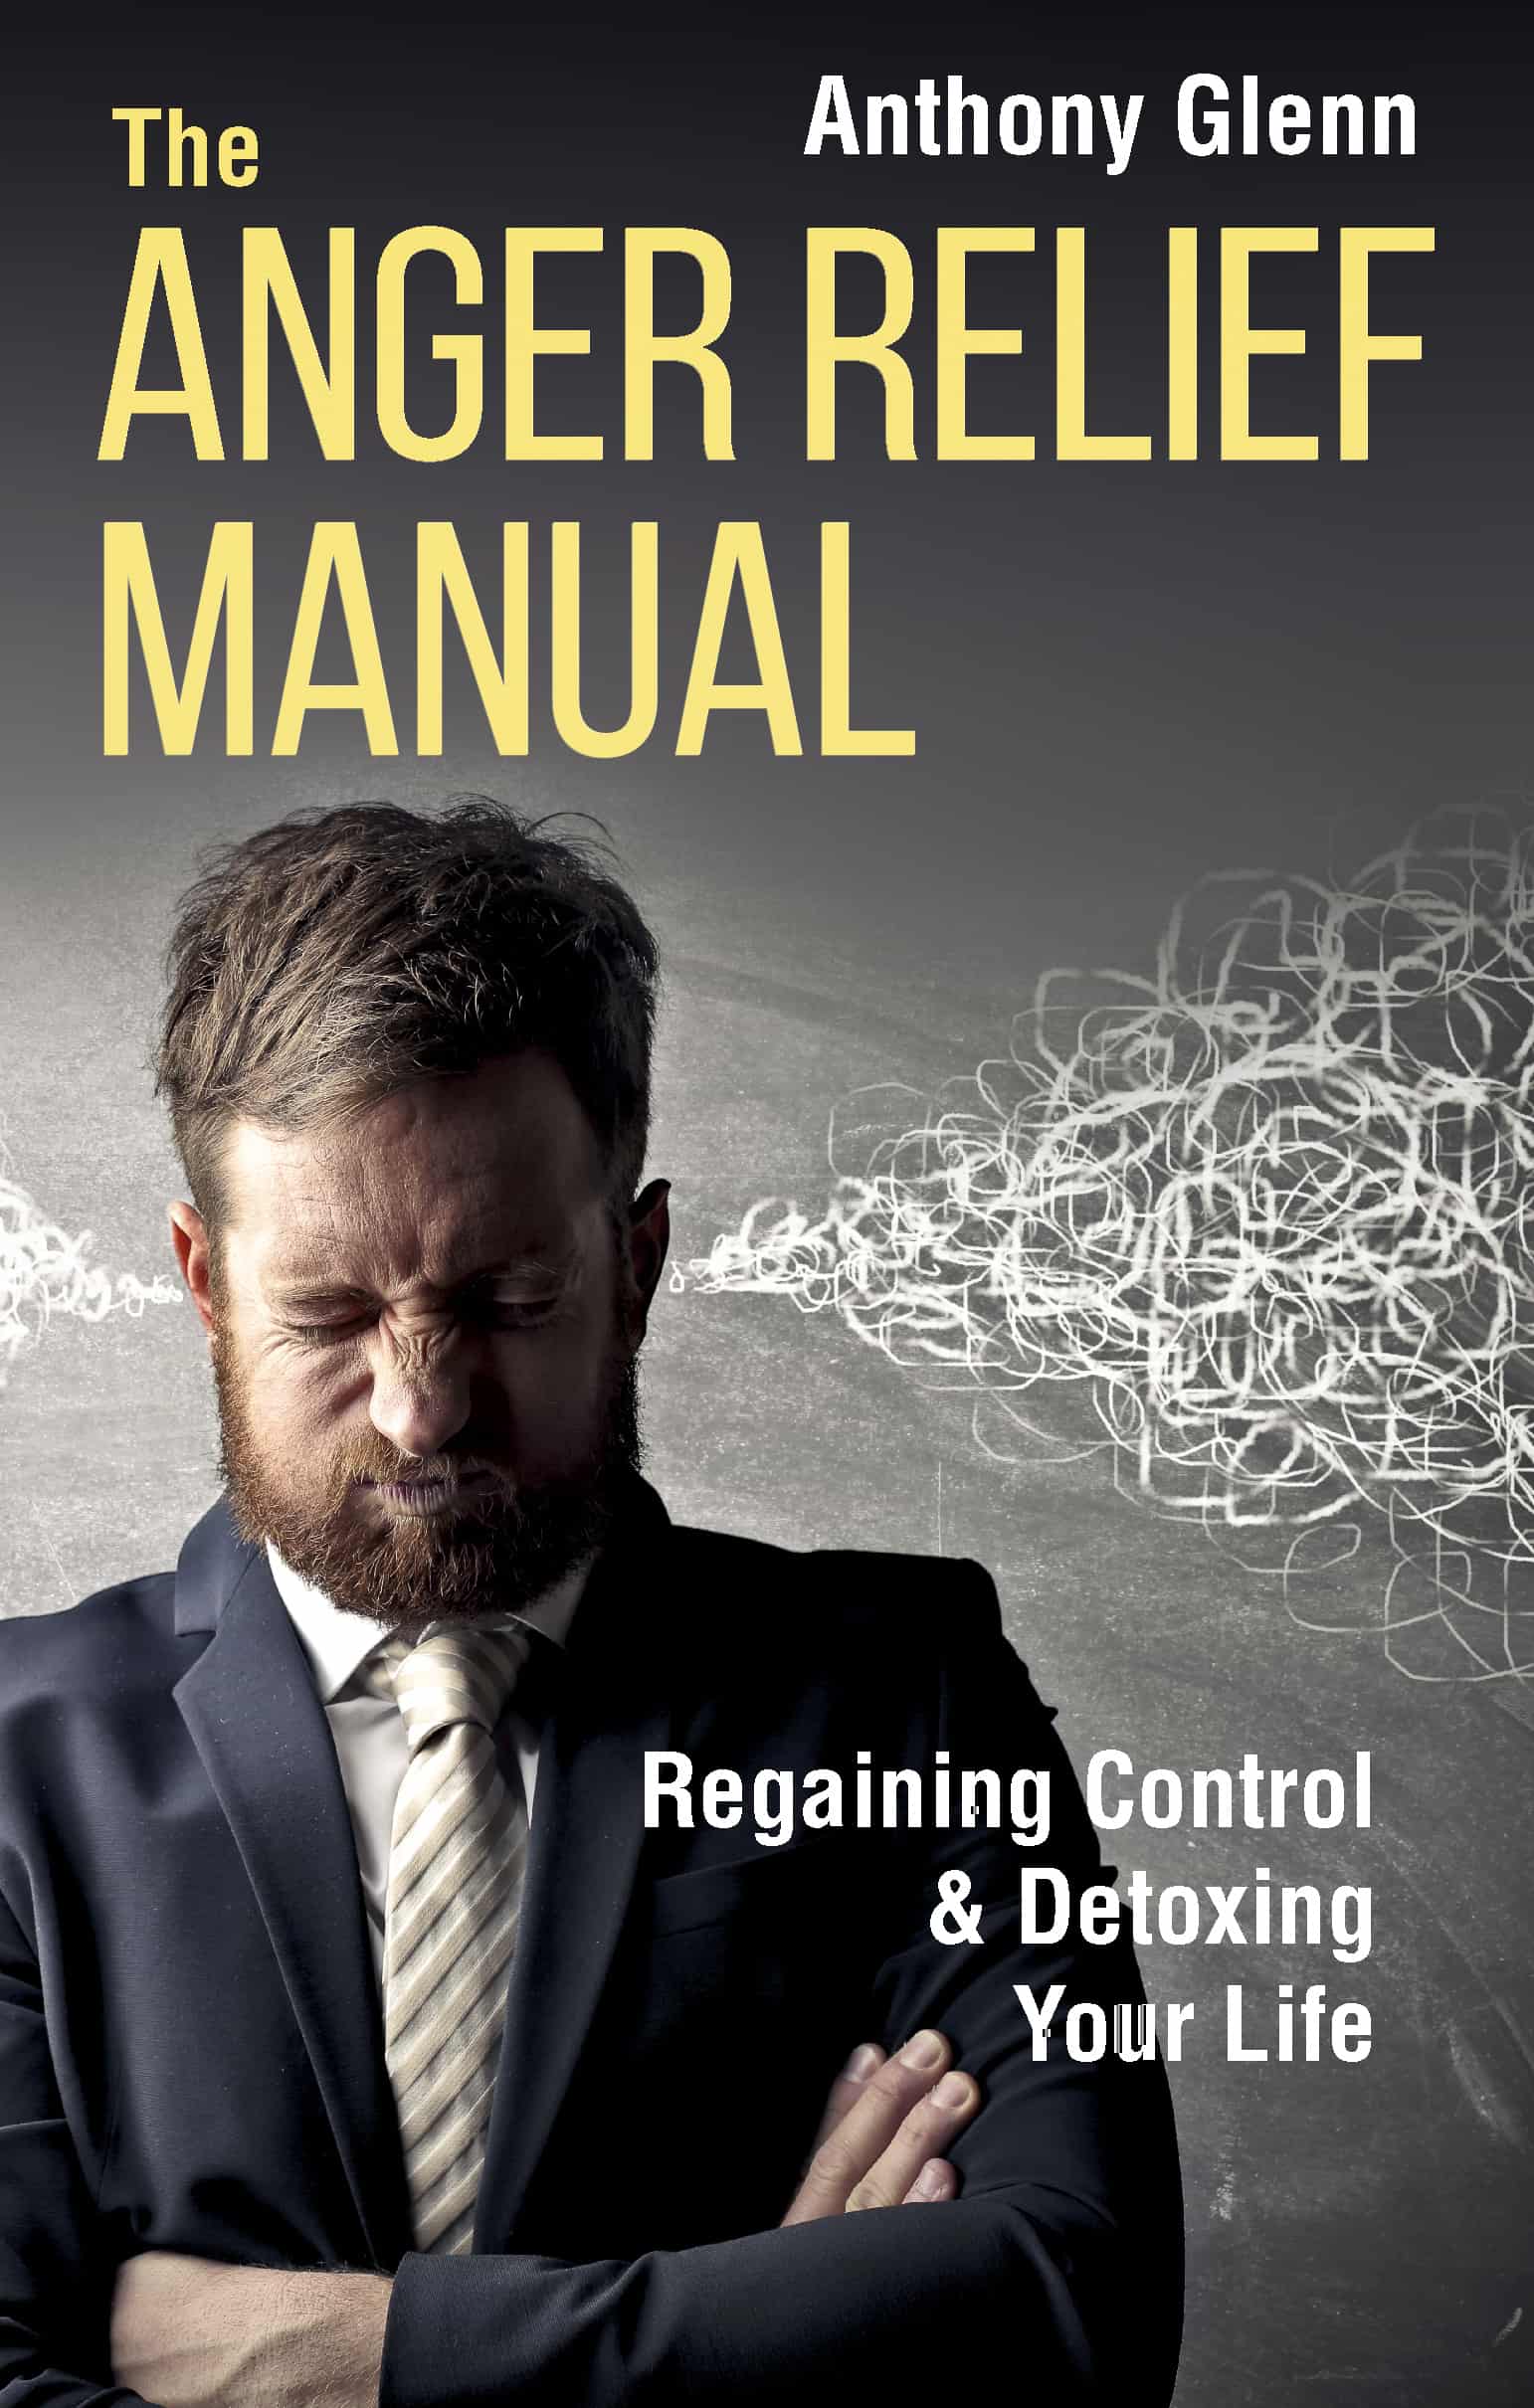 FREE: The Anger Relief Manual: Regaining Control and Detoxing Your Life by Anthony Glenn